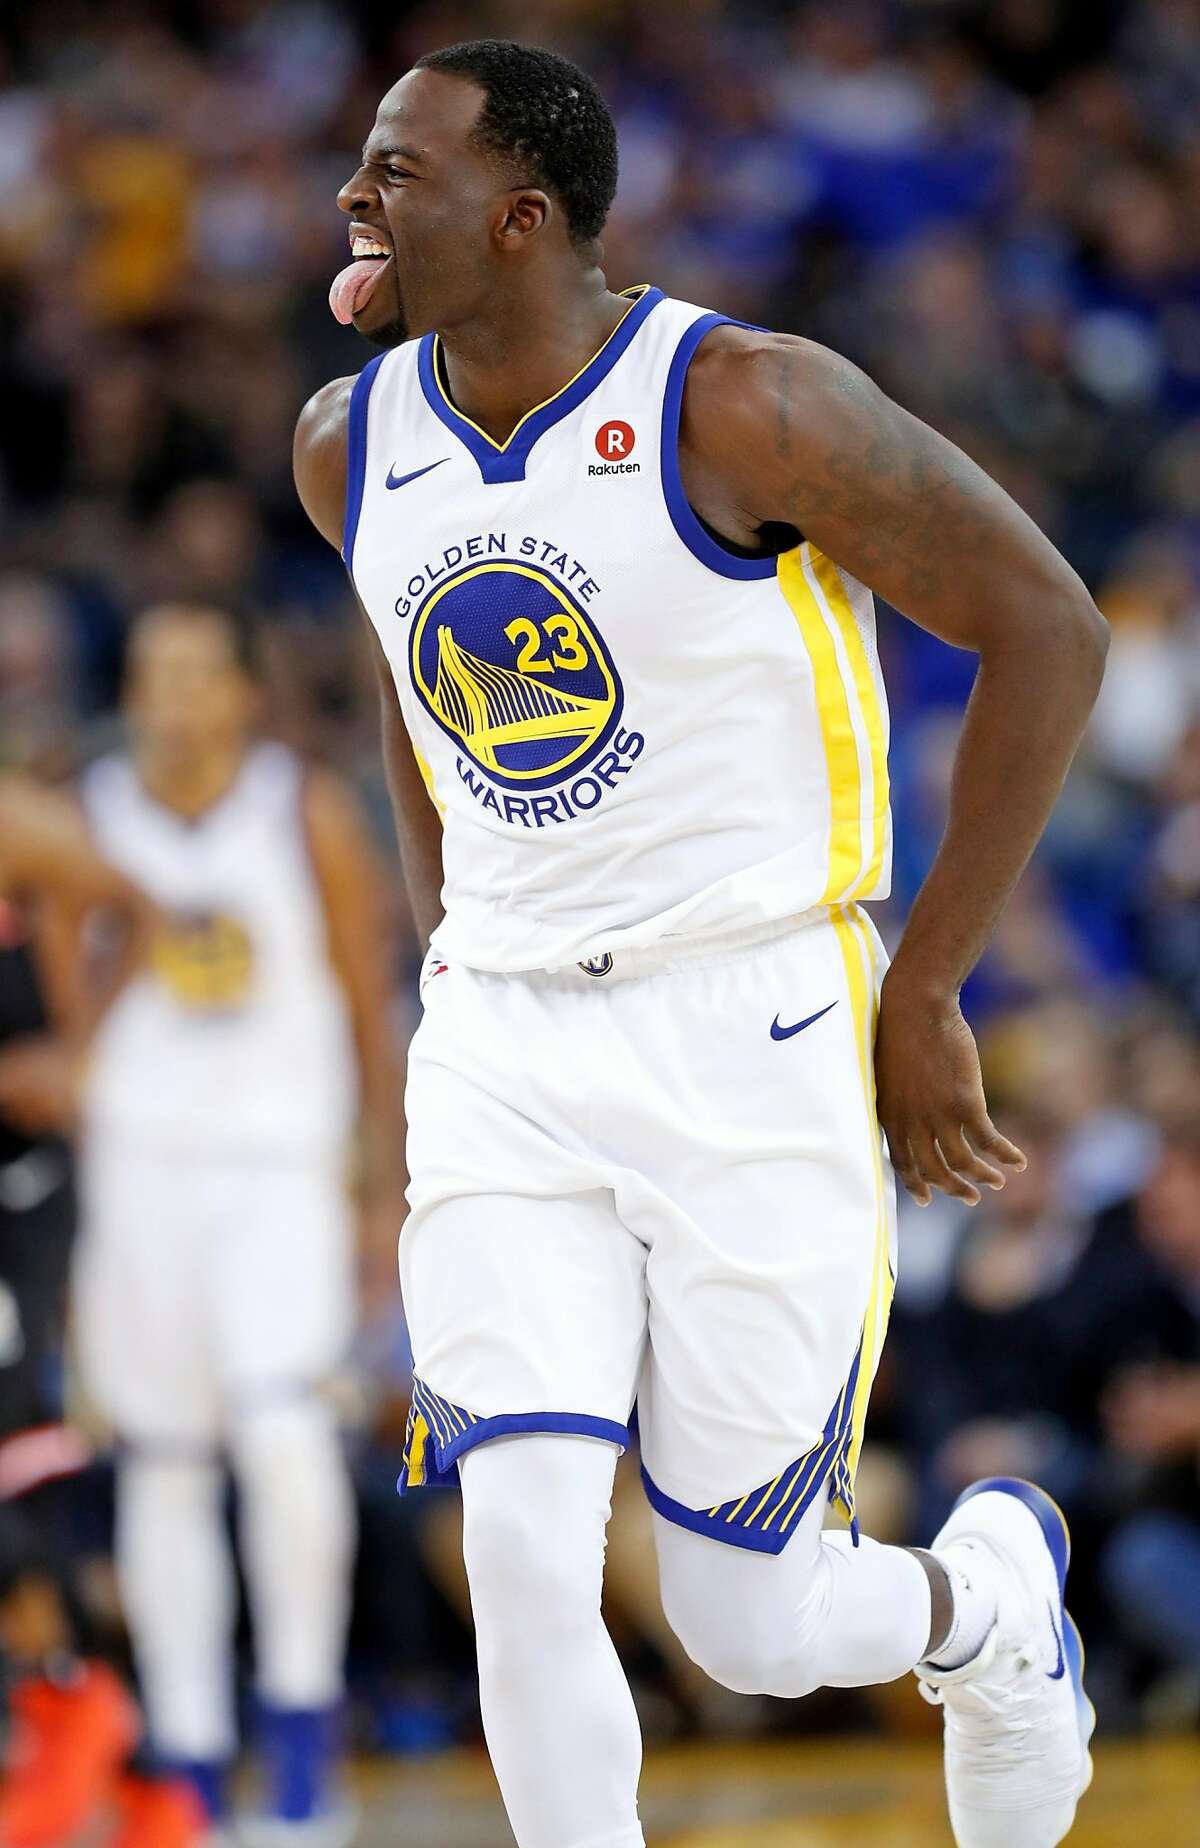 Golden State Warriors' Draymond Green reacts to making a 3-pointer in 4th quarter against Miami Heat during Warriors' 97-80 win in NBA game at Oracle Arena in Oakland, Calif., on Monday, November 6, 2017.